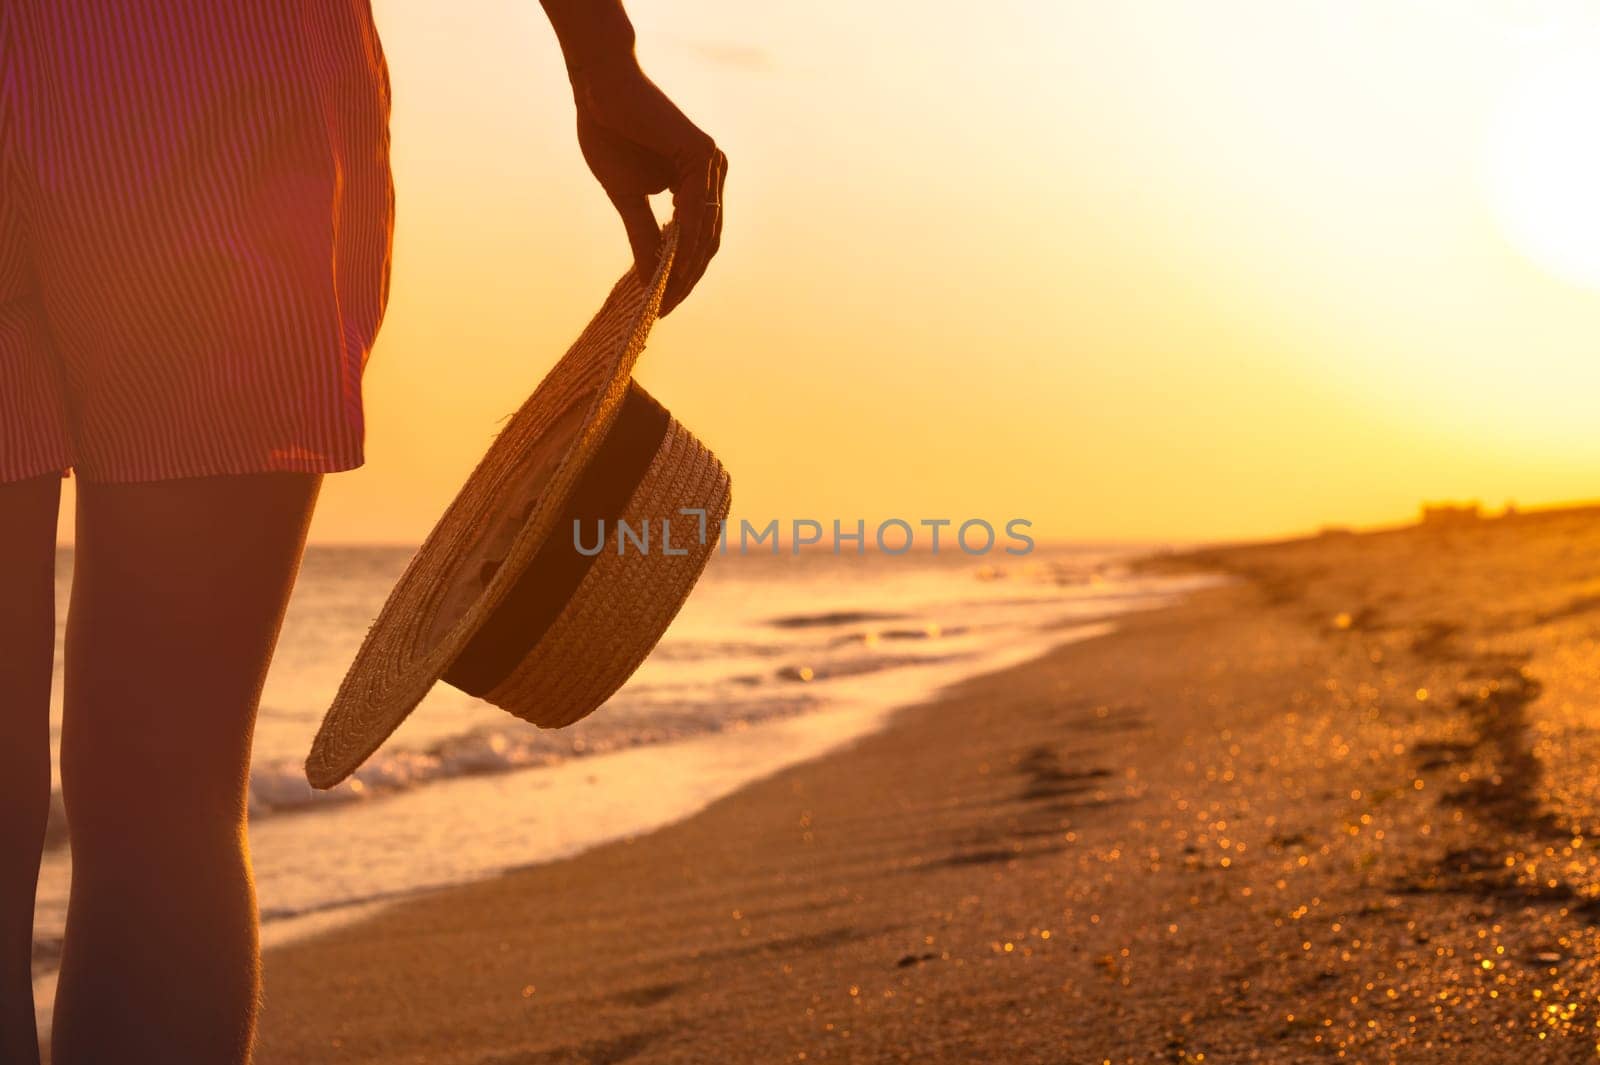 Detail of a straw hat held by a woman. Close-up of a straw hat in a woman's hand against the background of the sea or ocean. Vacation concept. Sea resort, travel.